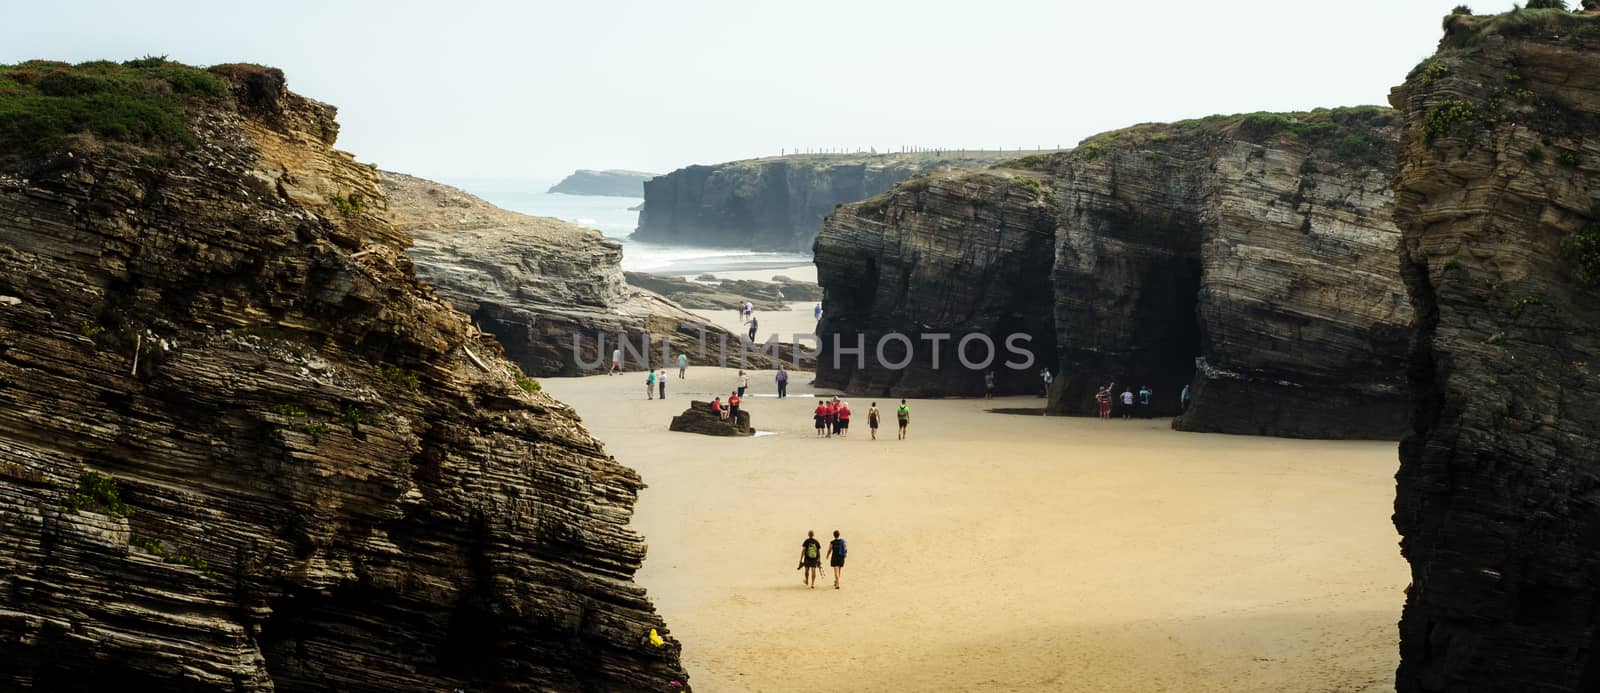 Cathedrals Beach's abrupt cliffs see people walking through them